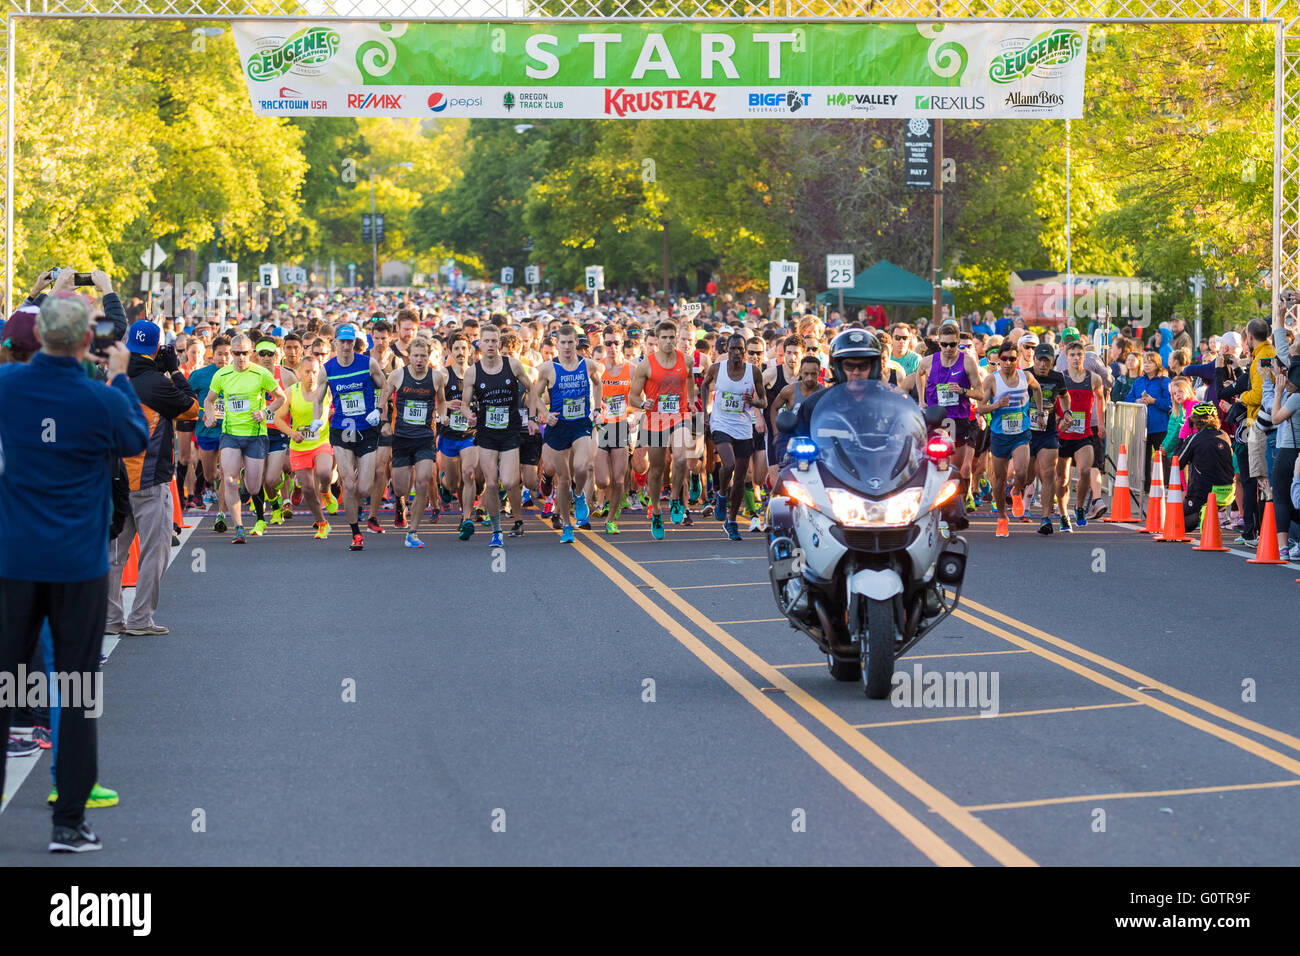 EUGENE, OR - MAY 1, 2016: Police motorcycle officer leads the pack of runners at the 2016 Eugene Marathon, a Boston qualifying e Stock Photo